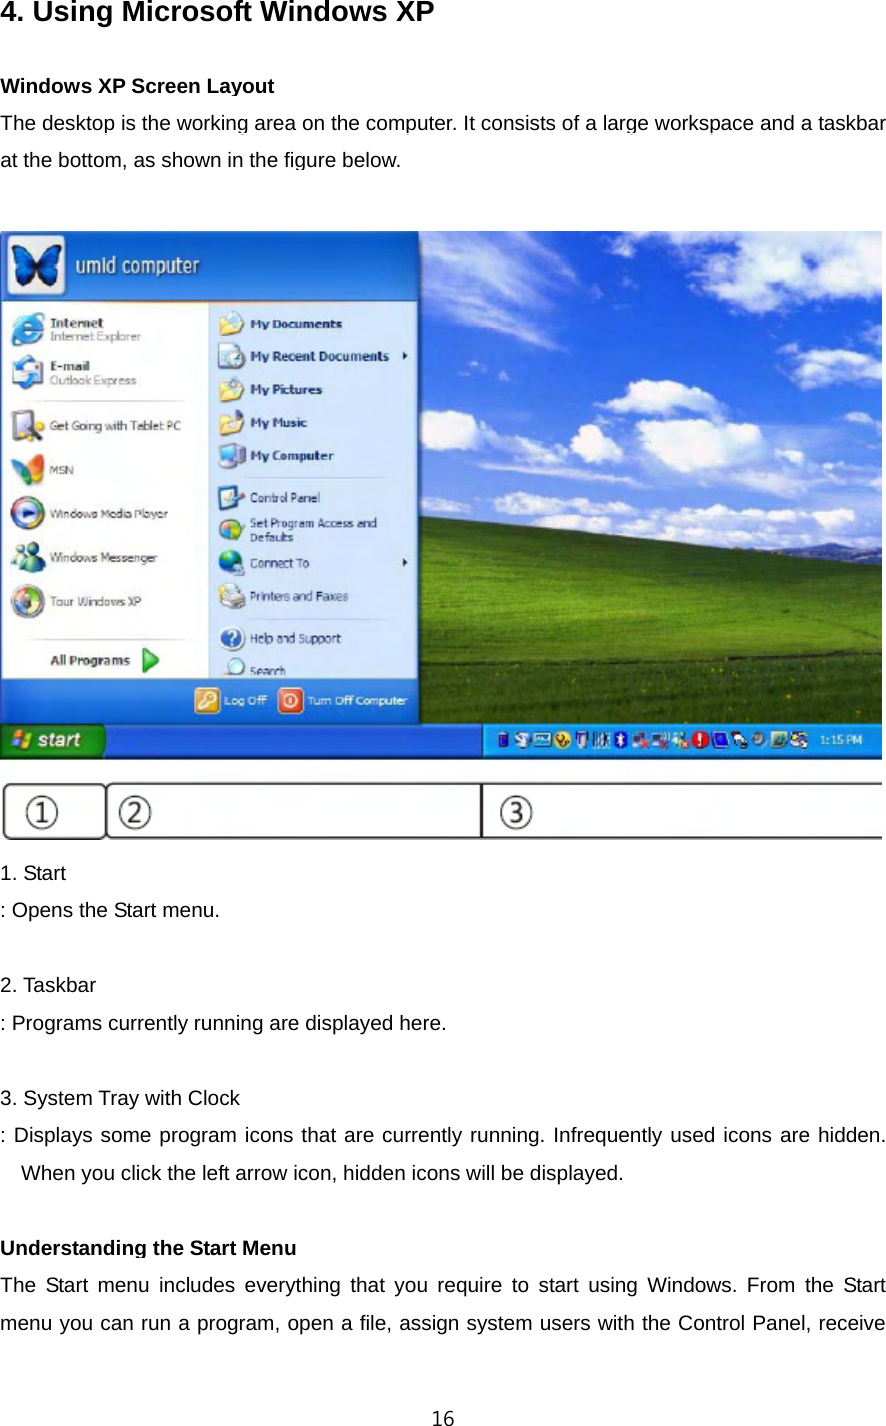   164. Using Microsoft Windows XP    Windows XP Screen Layout The desktop is the working area on the computer. It consists of a large workspace and a taskbar at the bottom, as shown in the figure below.   1. Start : Opens the Start menu.  2. Taskbar : Programs currently running are displayed here.  3. System Tray with Clock : Displays some program icons that are currently running. Infrequently used icons are hidden. When you click the left arrow icon, hidden icons will be displayed.    Understanding the Start Menu The Start menu includes everything that you require to start using Windows. From the Start menu you can run a program, open a file, assign system users with the Control Panel, receive 